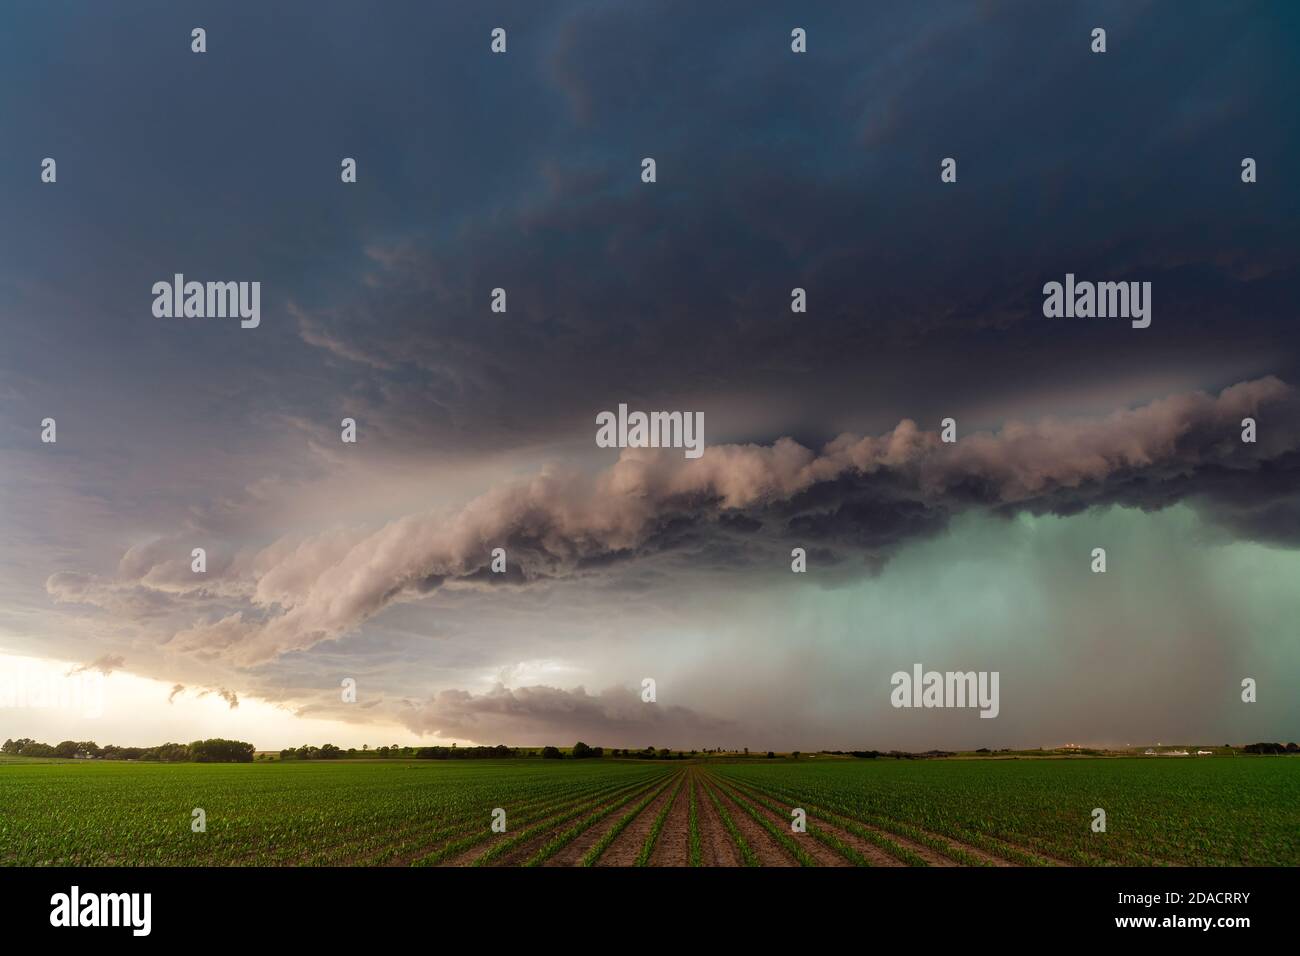 Severe thunderstorm with ominous sky and storm clouds near Anselmo, Nebraska Stock Photo